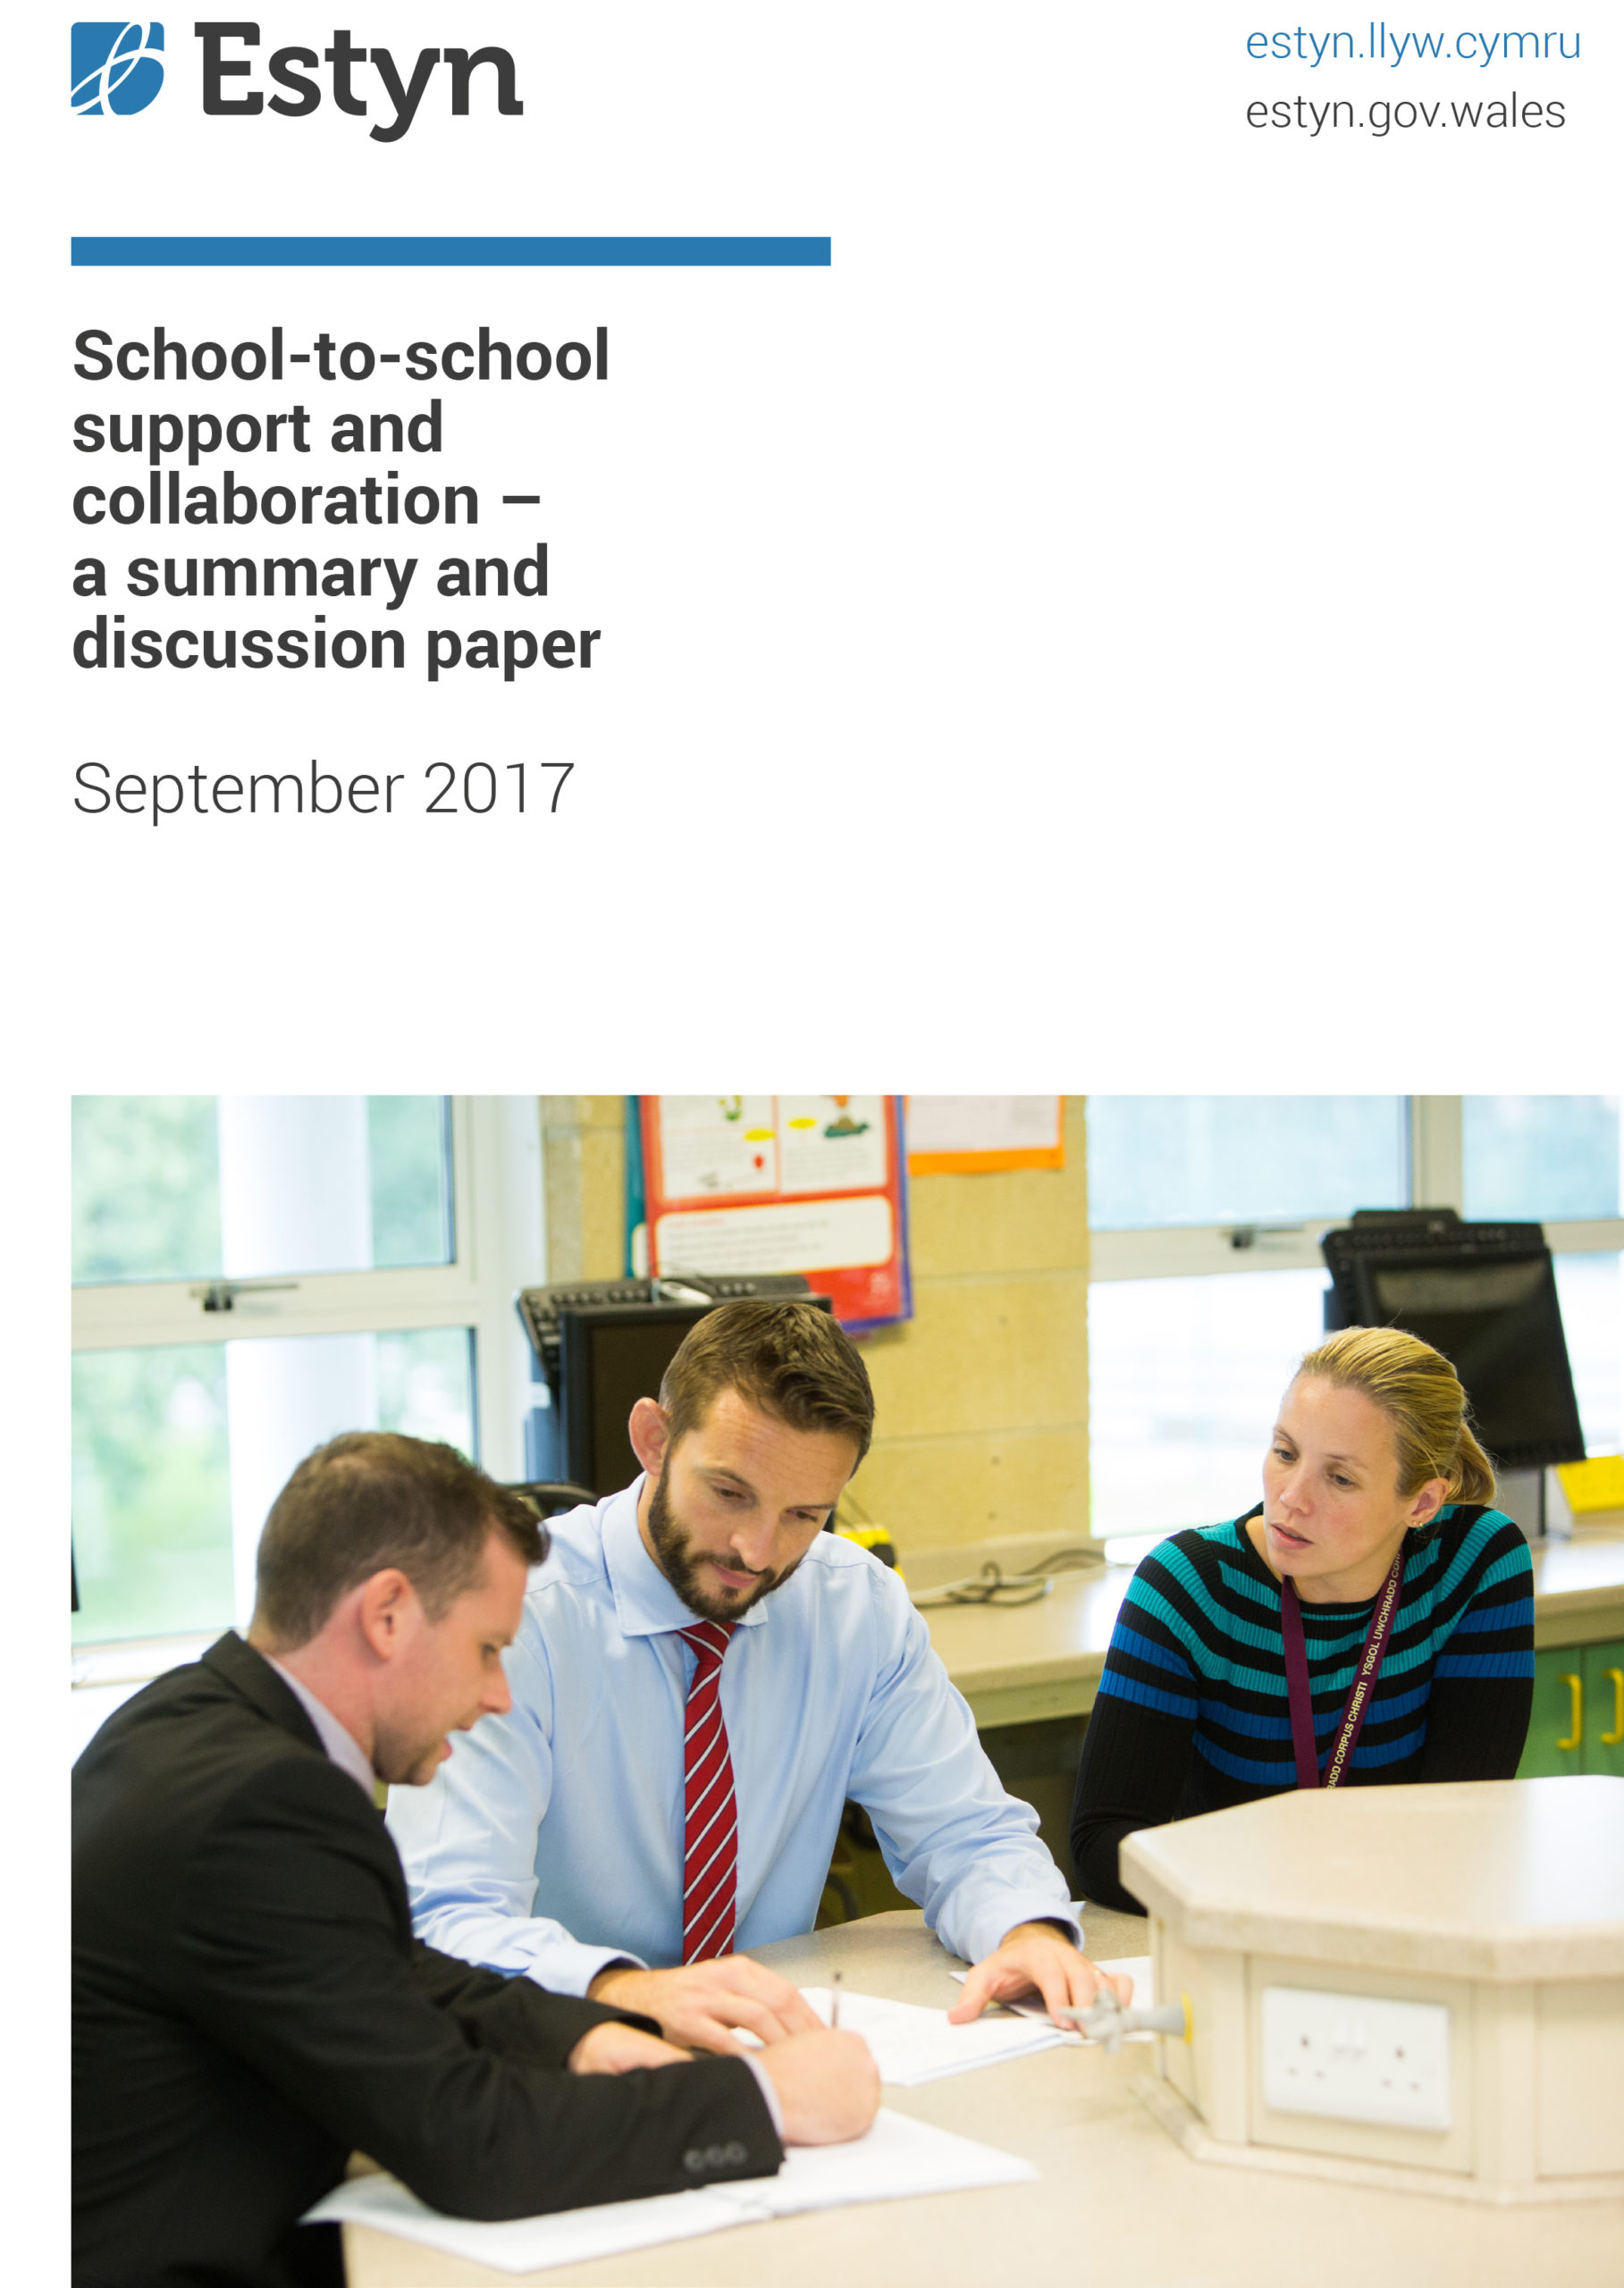 School-to-school support and collaboration